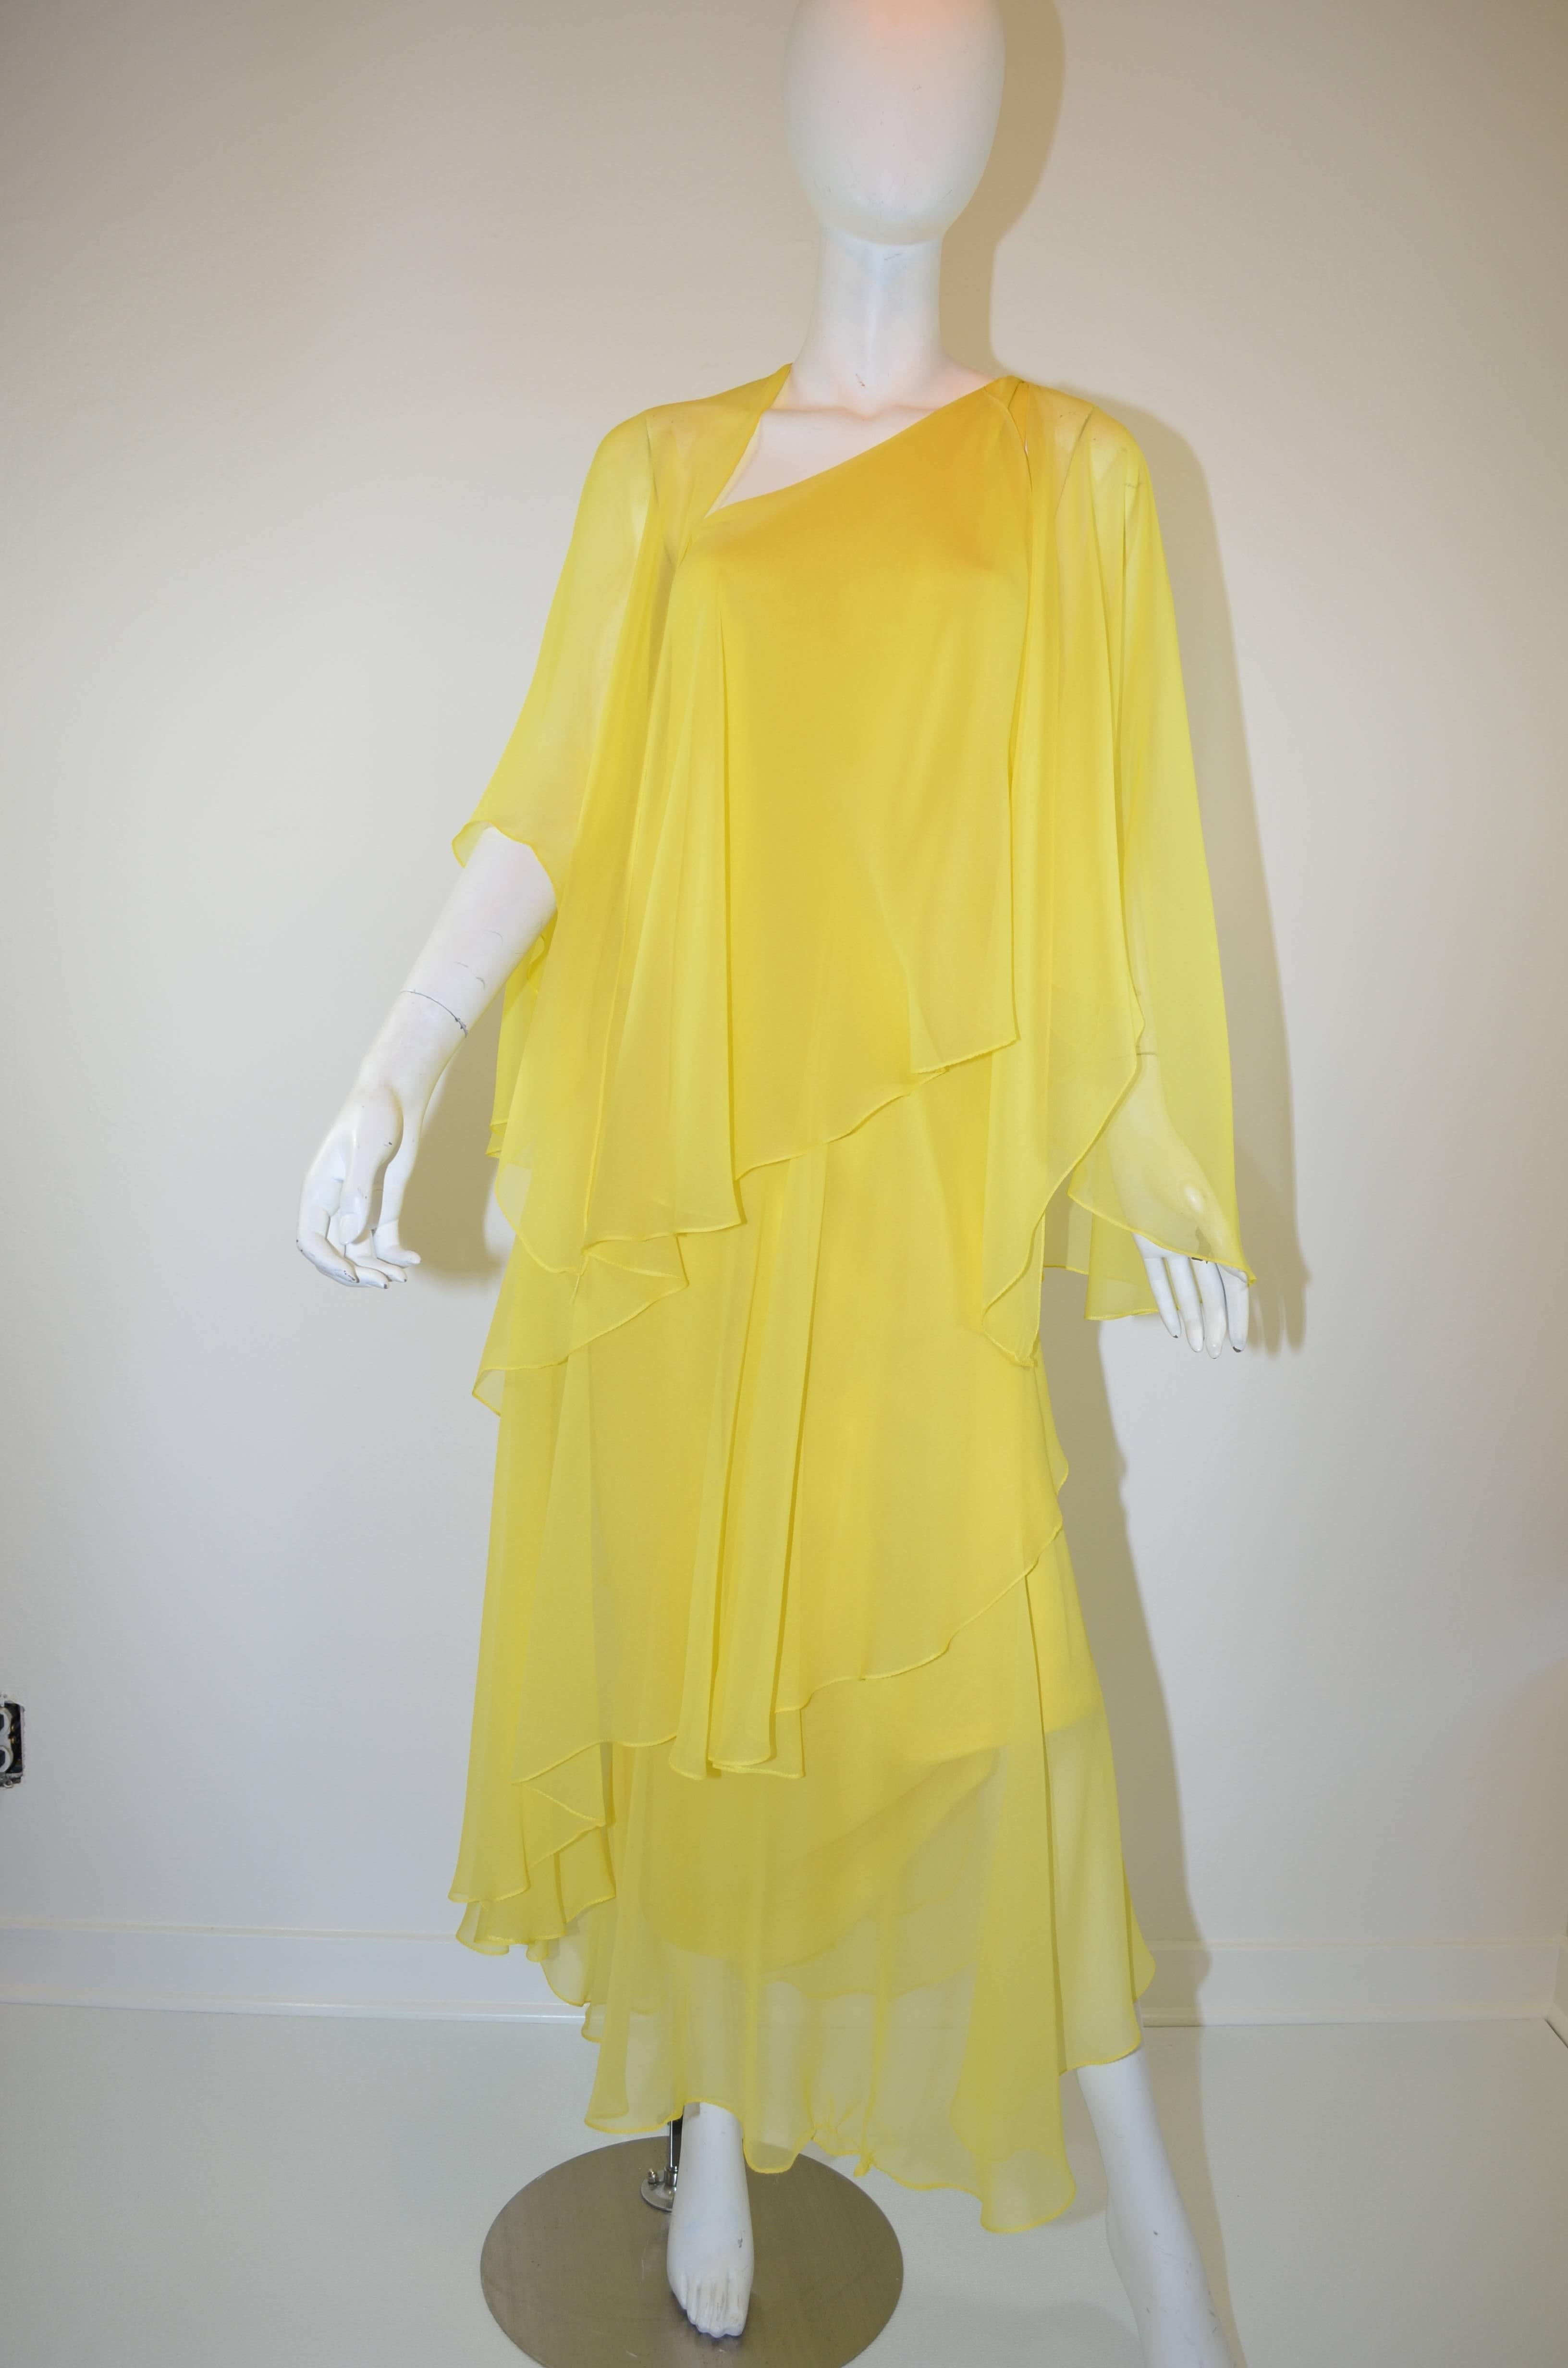 Beautiful Vintage Halston Yellow Silk Chiffon One-Shoulder Gown With Shawl

Vintage 1970's Halston yellow silk chiffon gown with optional shawl. This gorgeous one-shoulder gown features an adjustable tie closure. Lovely layered silk chiffon dress